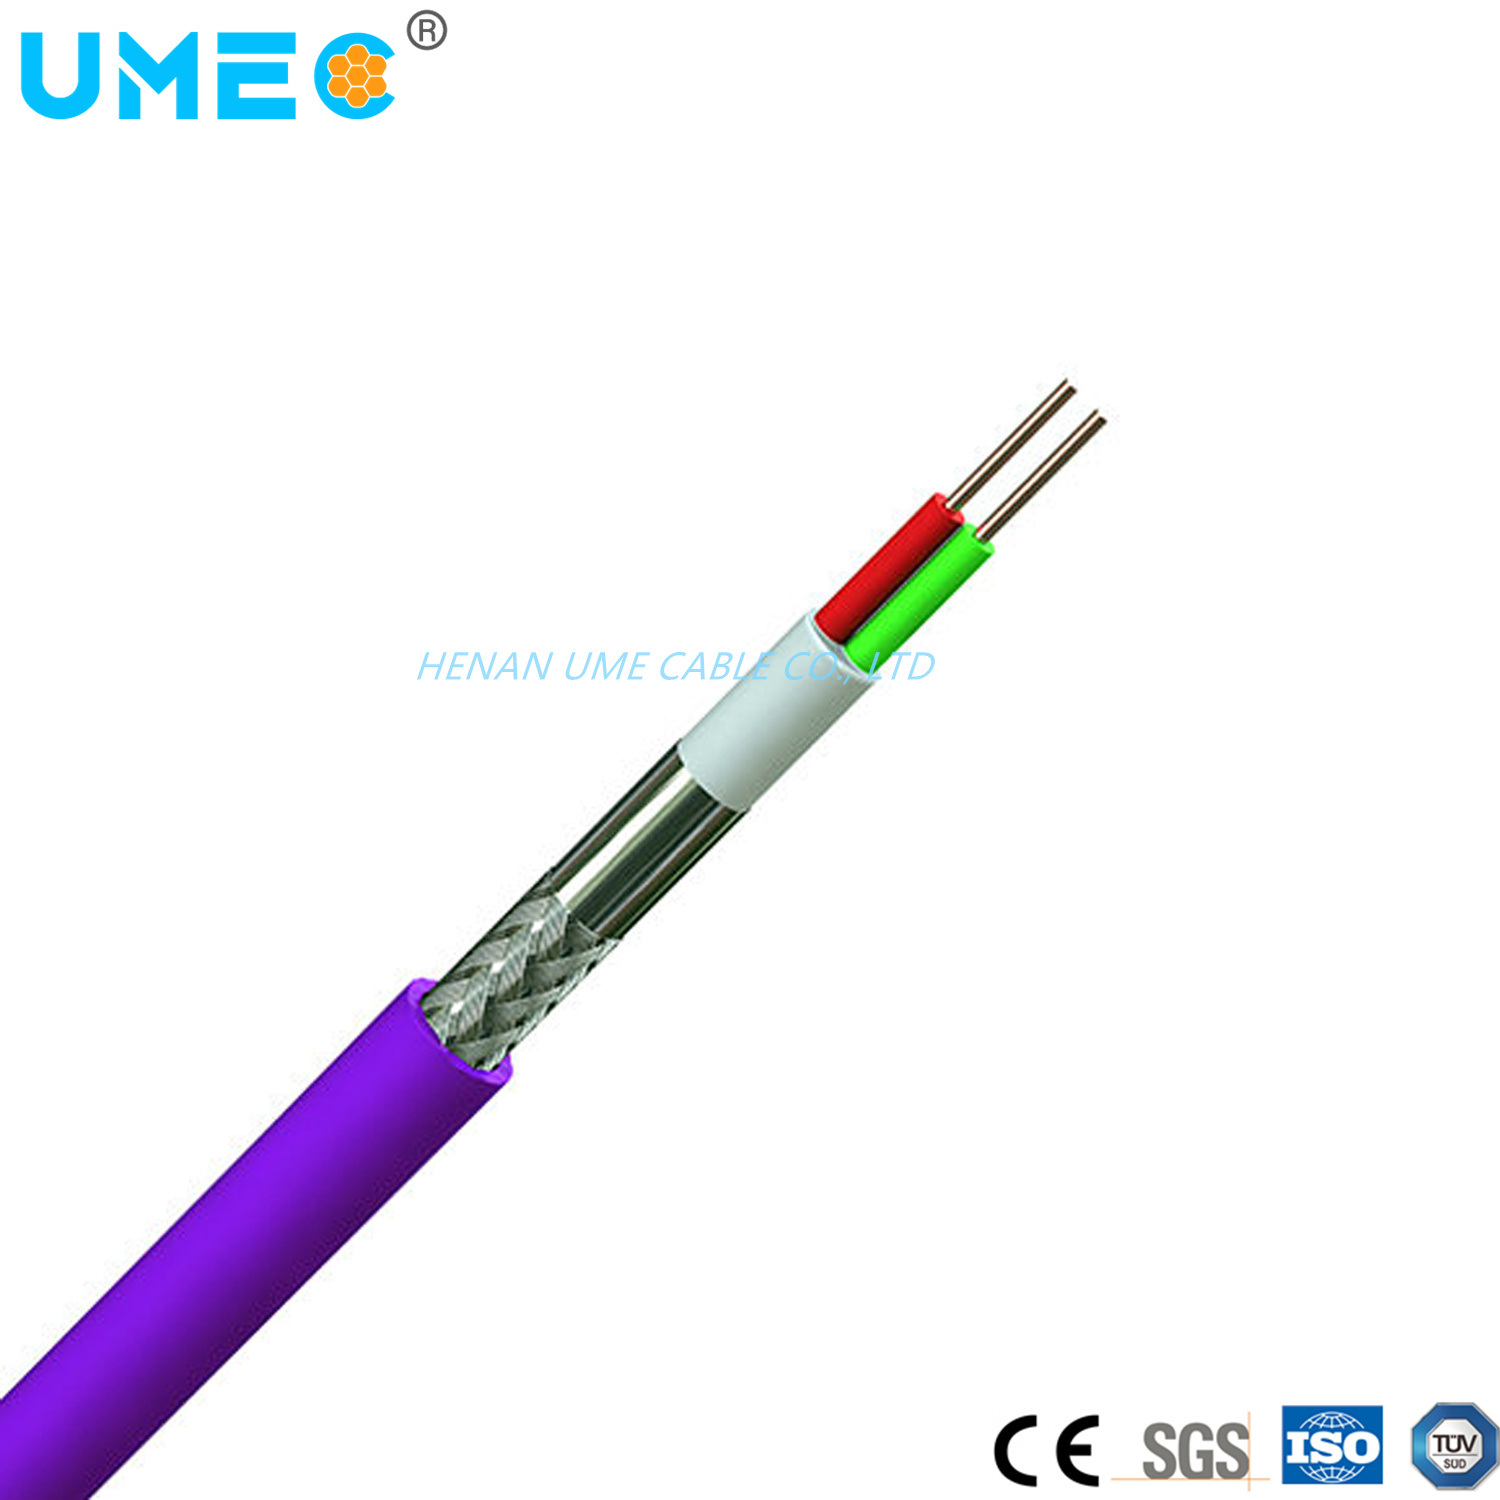 Low Voltage Copper Conductor Siemens 6xv1830-0eh10 Cable Industrial Electrical Cable